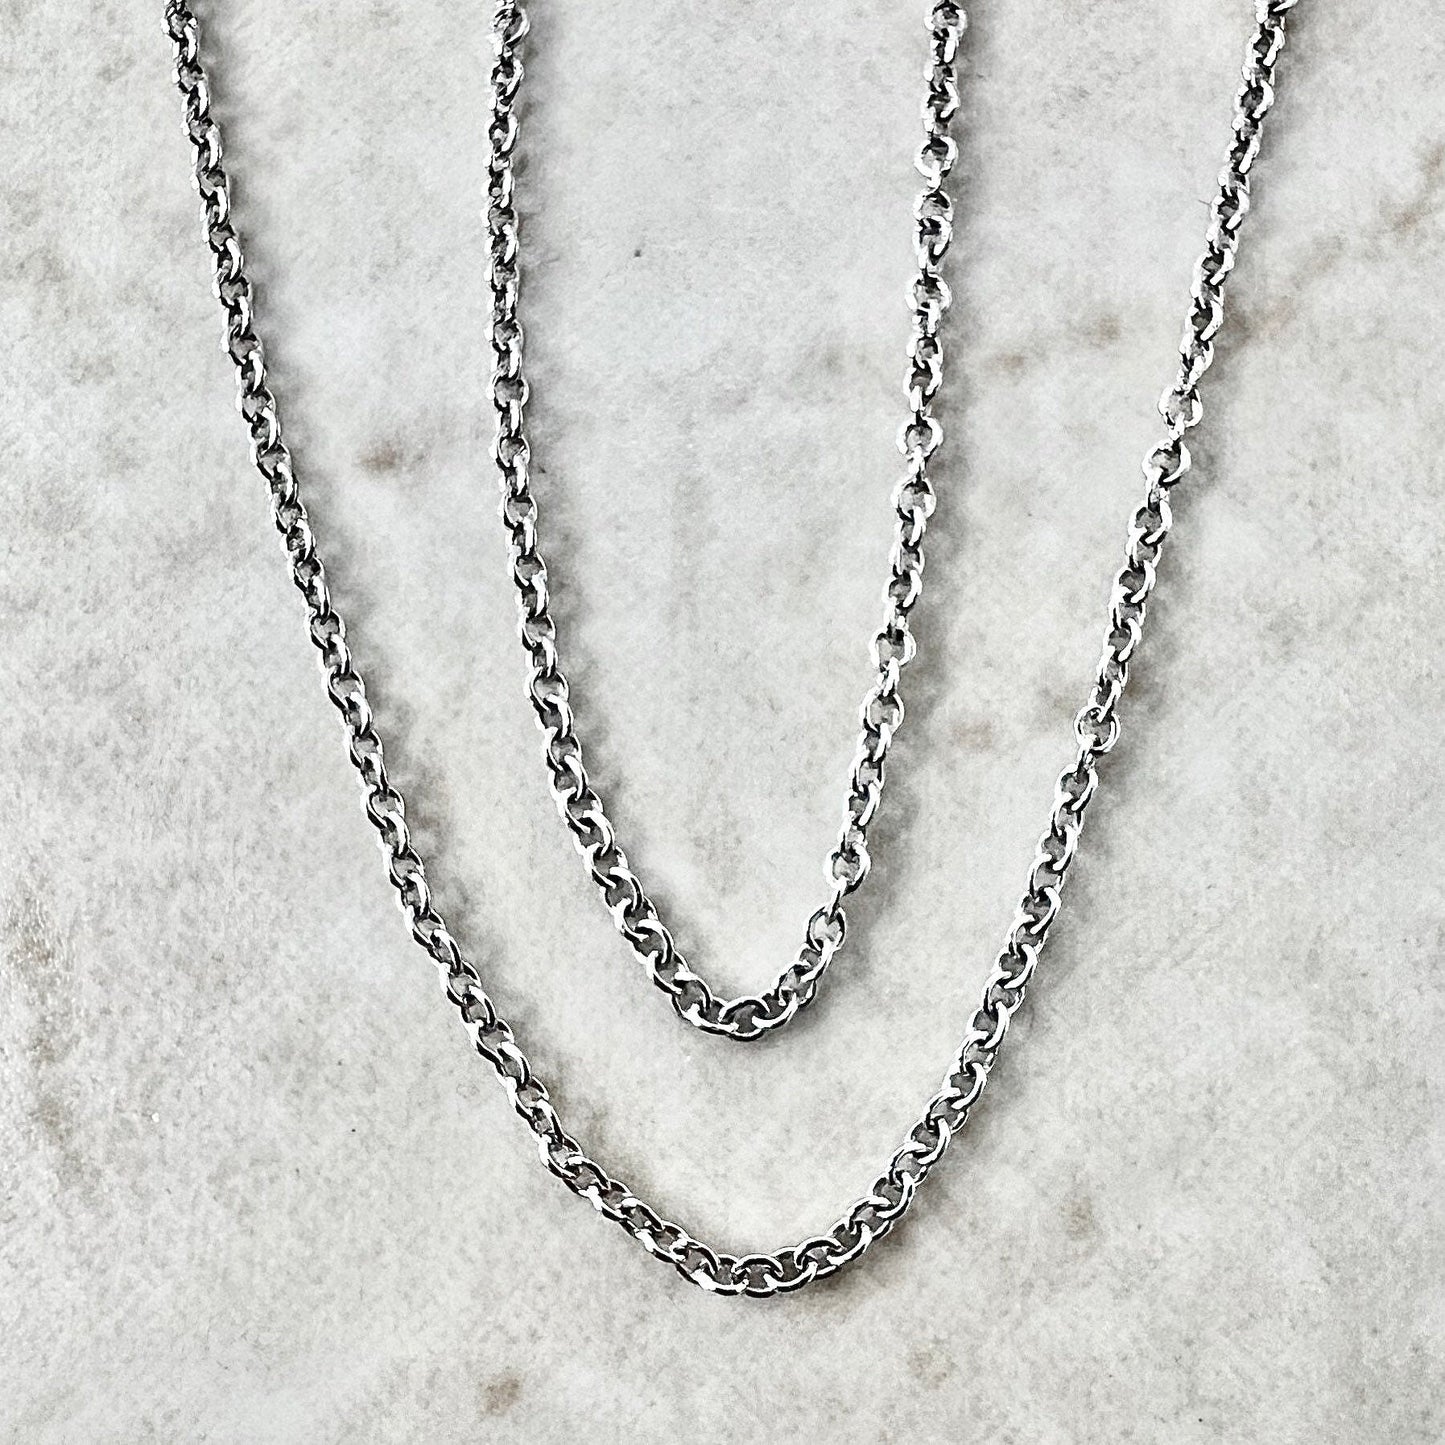 Classic 14K White Gold Cable Chain Necklace - 18” Gold Chain - White Gold Chain Necklace - Gifts For Her - Mother’s Day Gifts - Gift For Mom